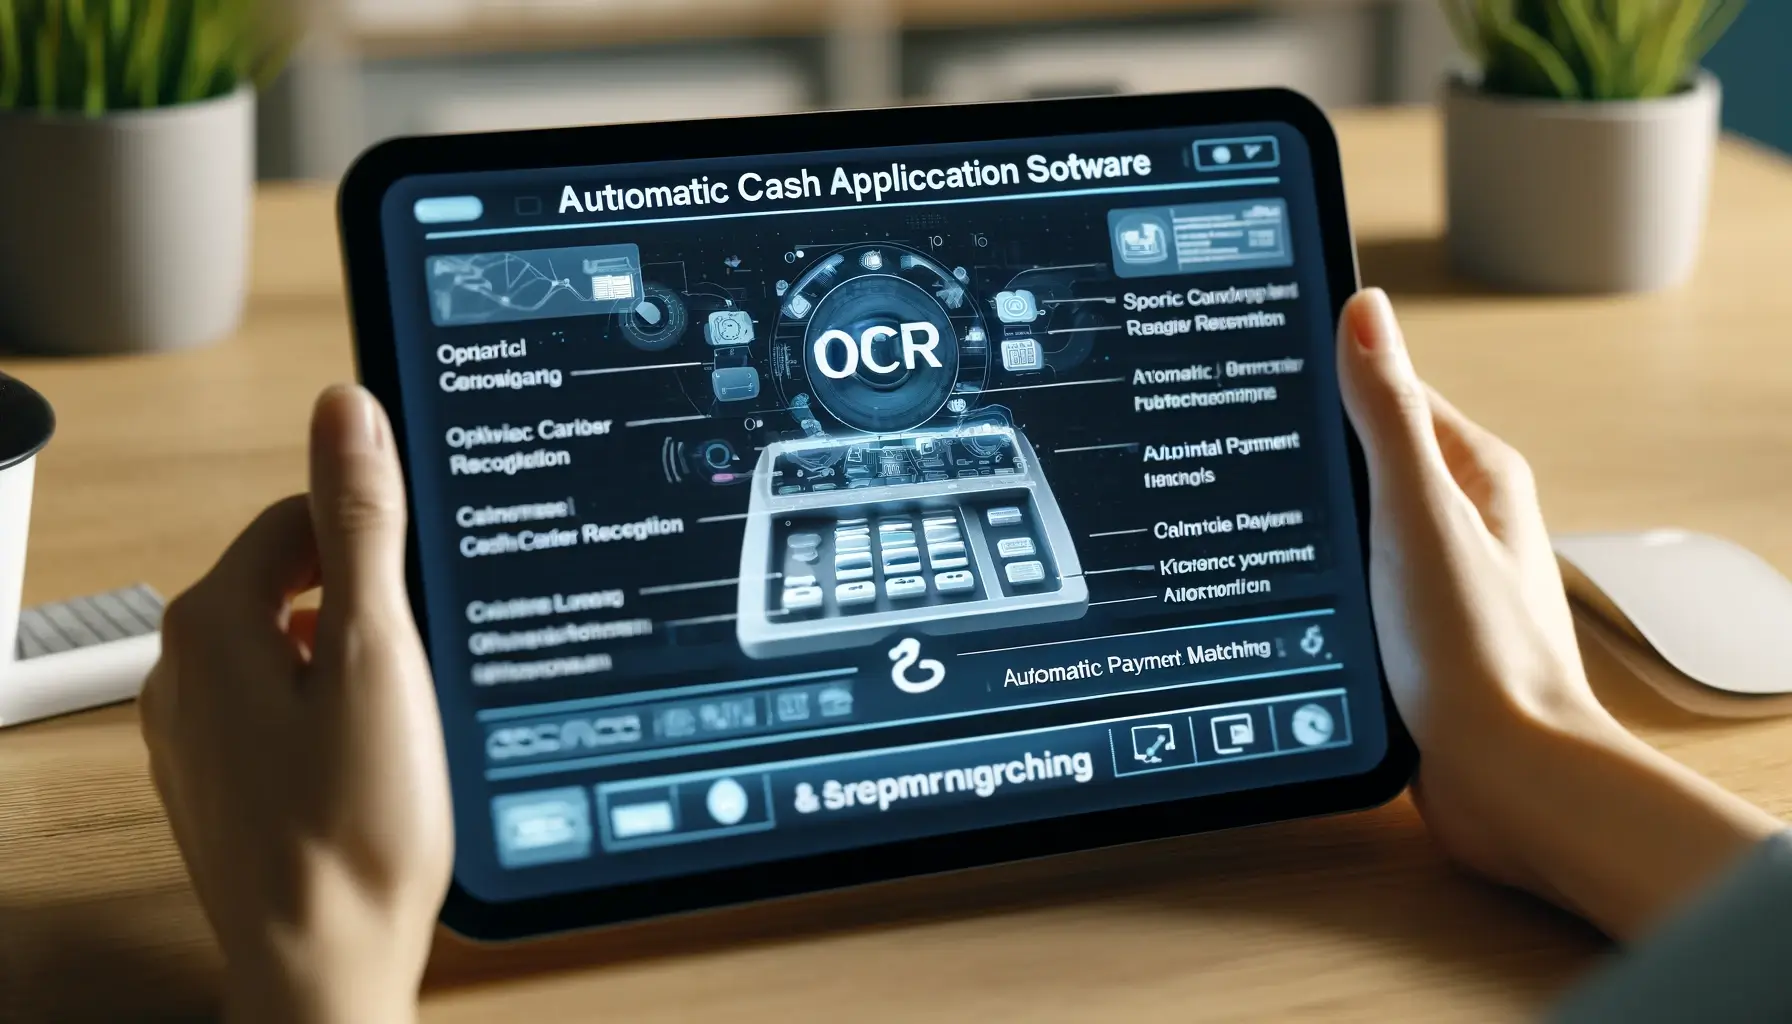 Close-up view of a screen displaying the interface of an automated cash application software, highlighting OCR technology and payment matching